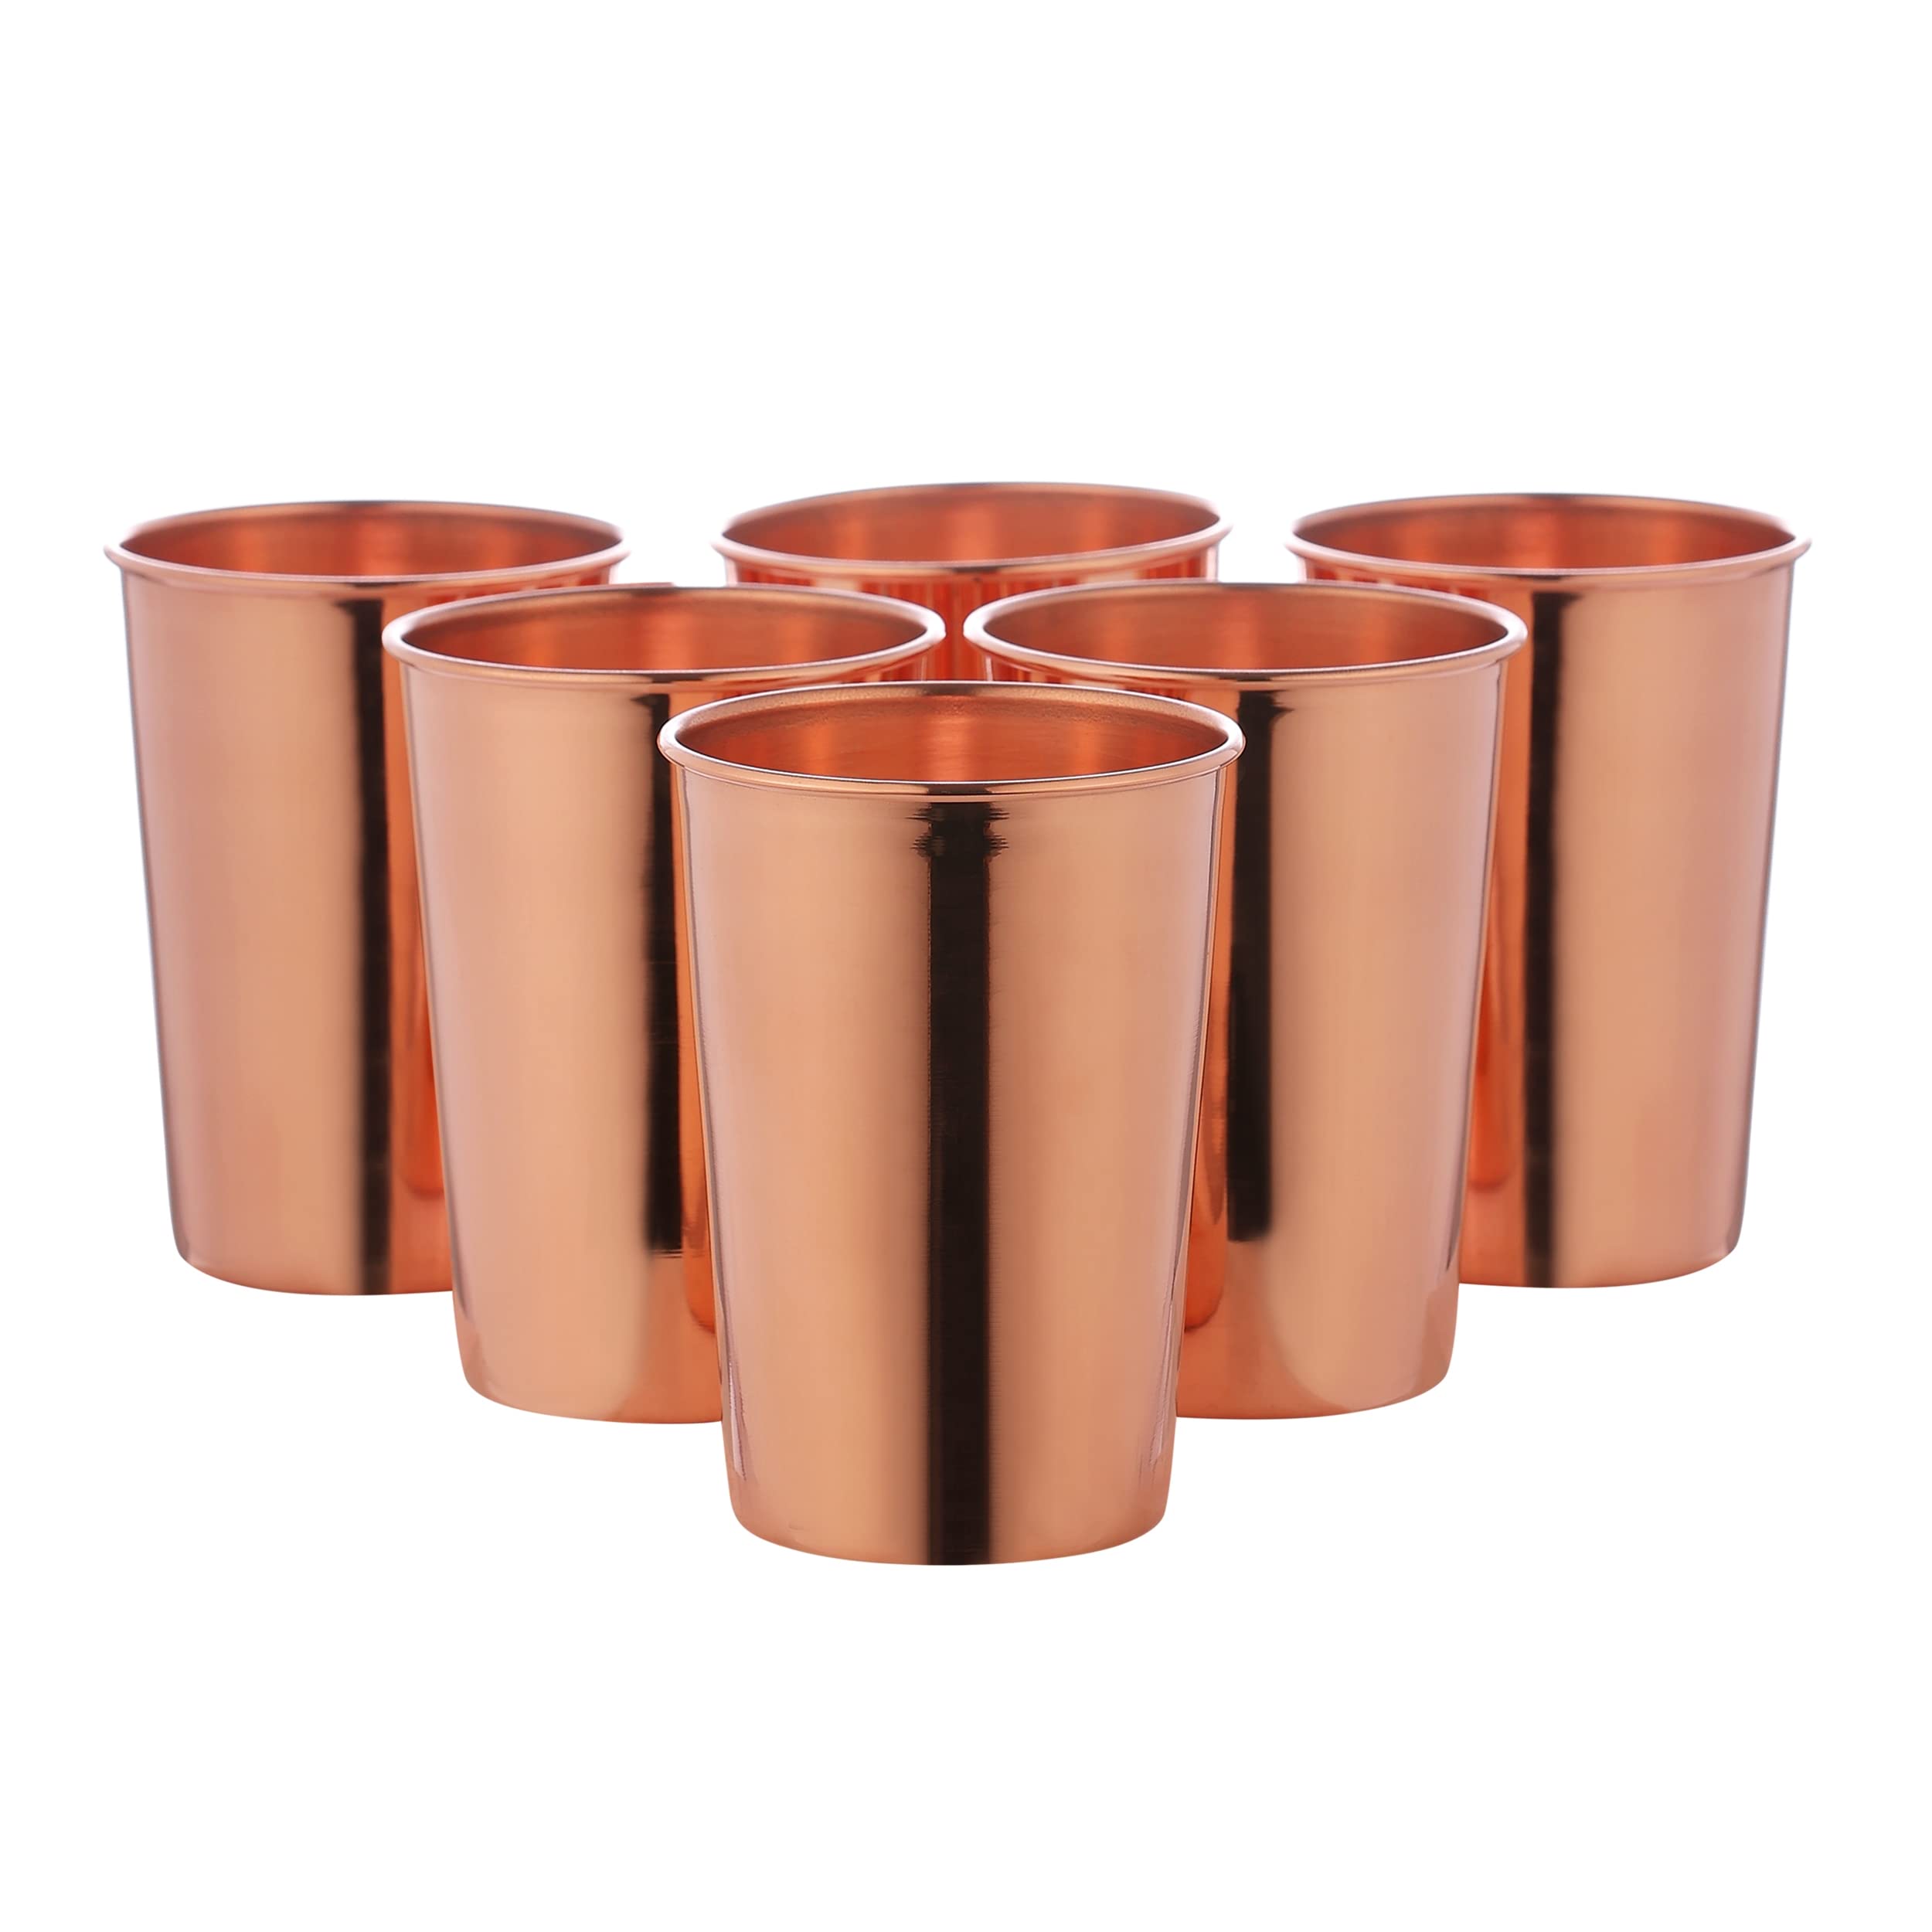 Pure Copper Tumbler Set of 6, UNLINED, UNCOATED and LACQUER FREE, 350 Ml (11.8 US Fl Oz) Capacity For Ayurveda Health Benefits